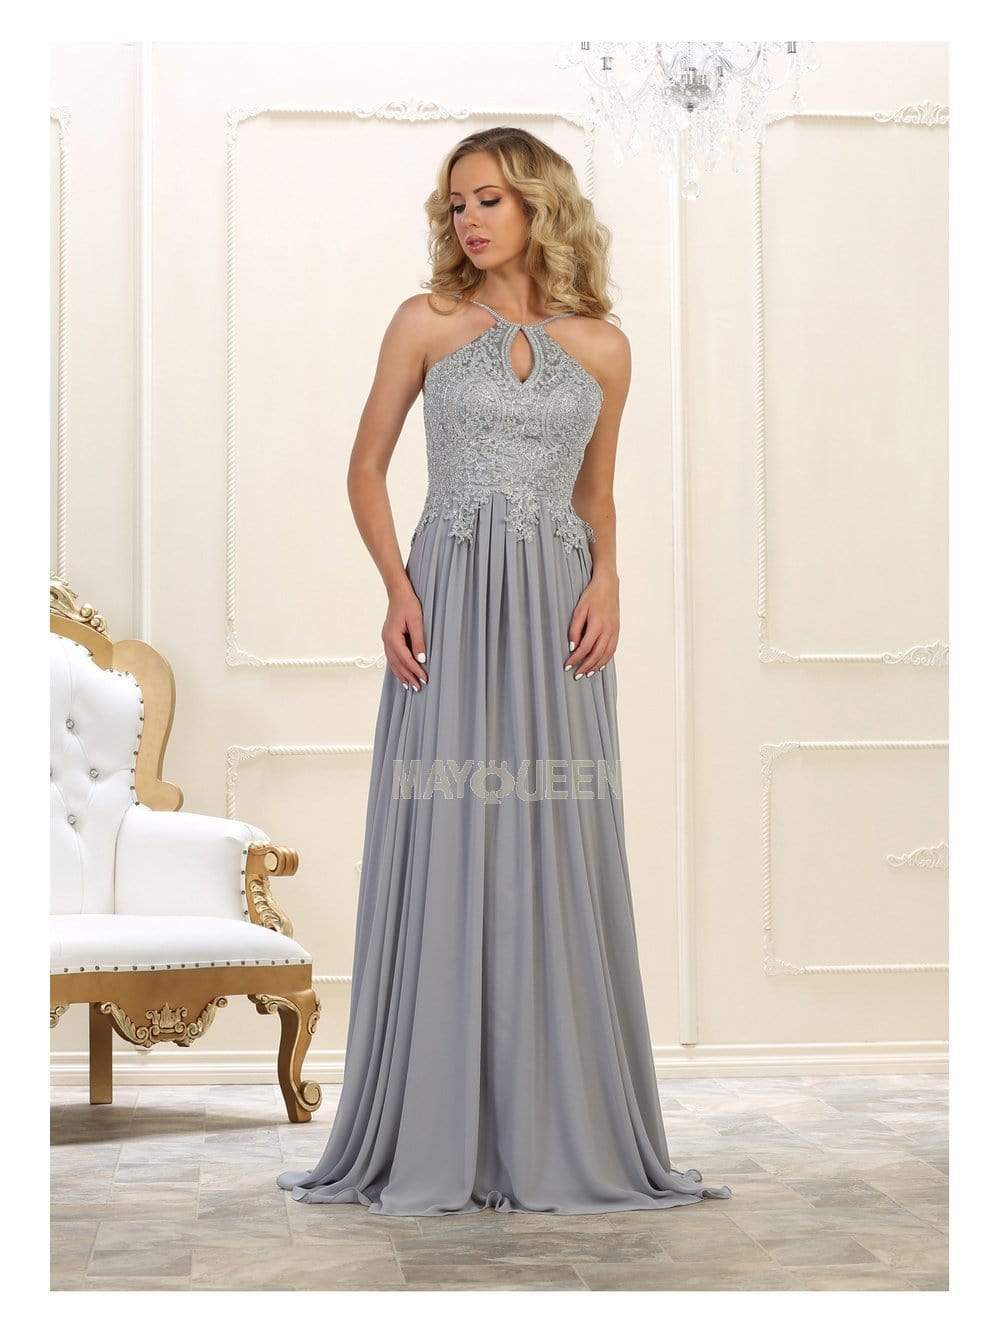 May Queen - MQ1569 Embroidered Halter A-line Dress Prom Dresses 4 / Silver/Silver